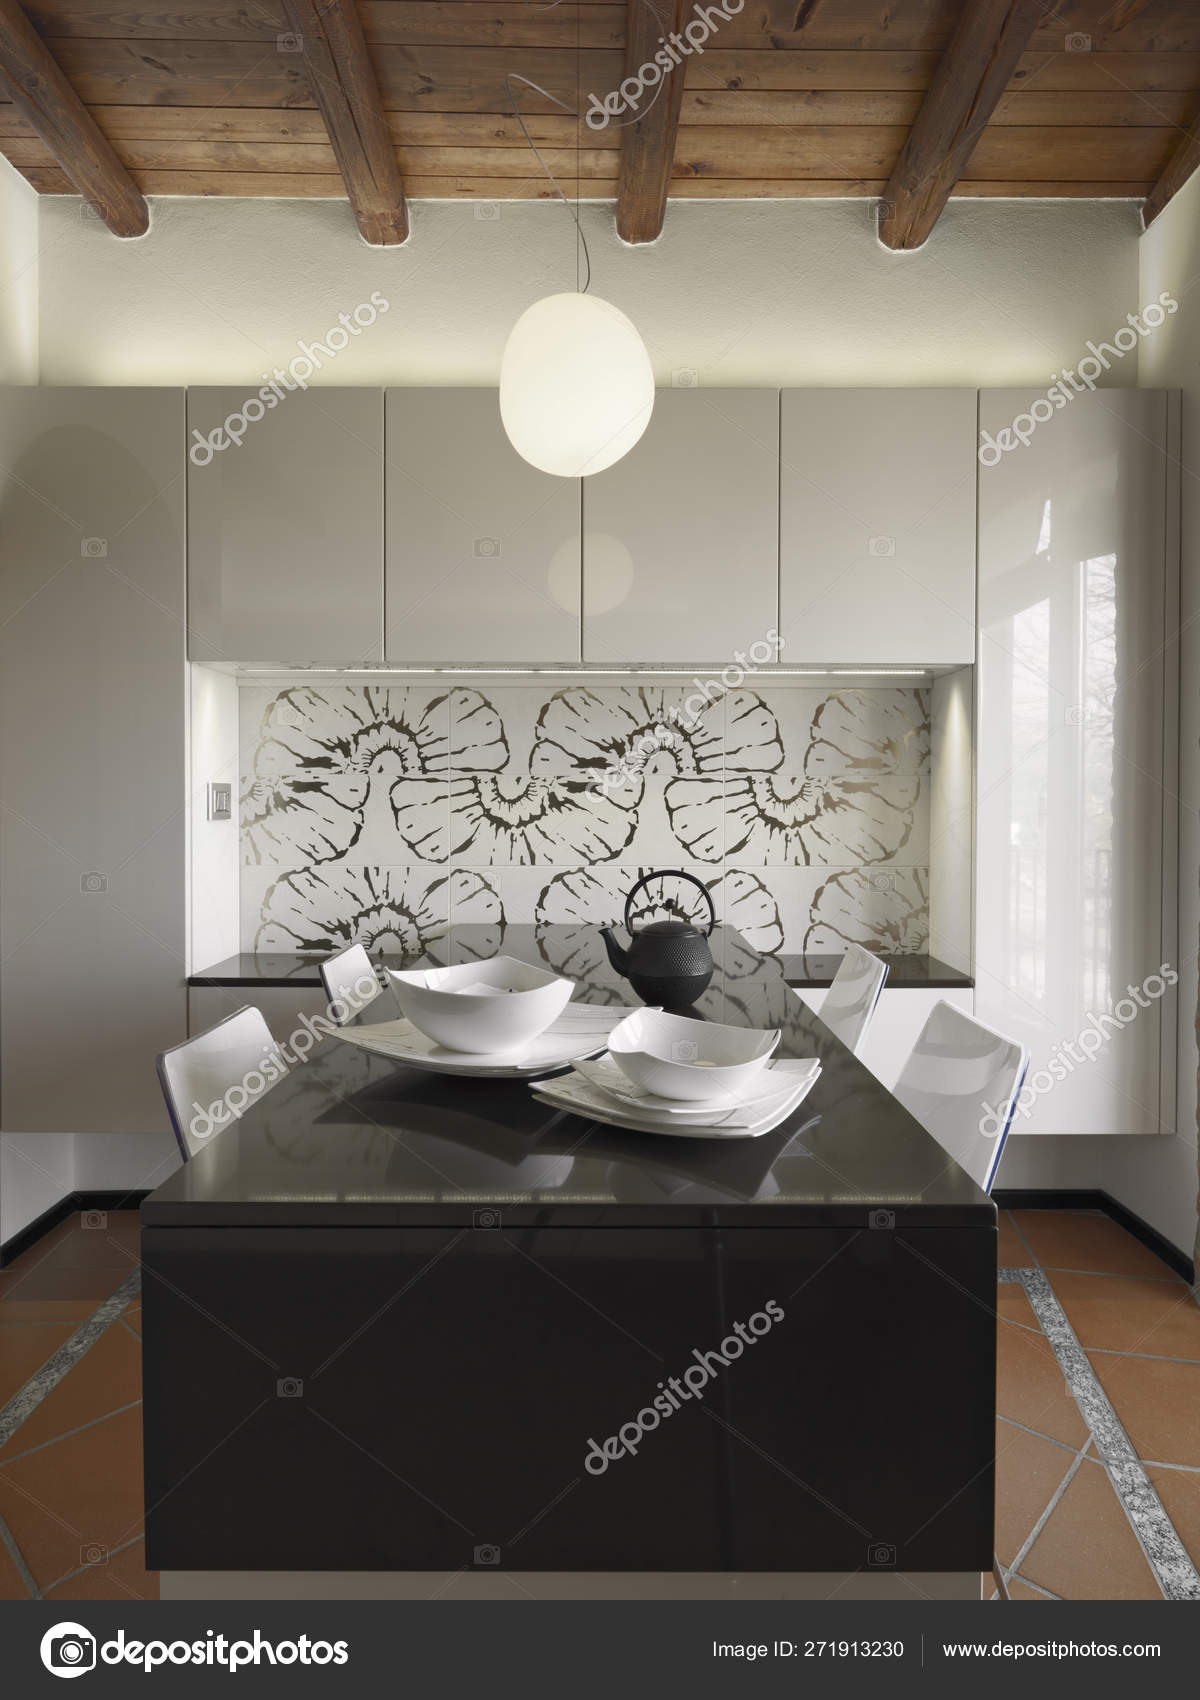 Dishes Foreground Dining Table Modern Kitchen Whose Floor Made Terracotta Stock Photo Aaphotograph 271913230